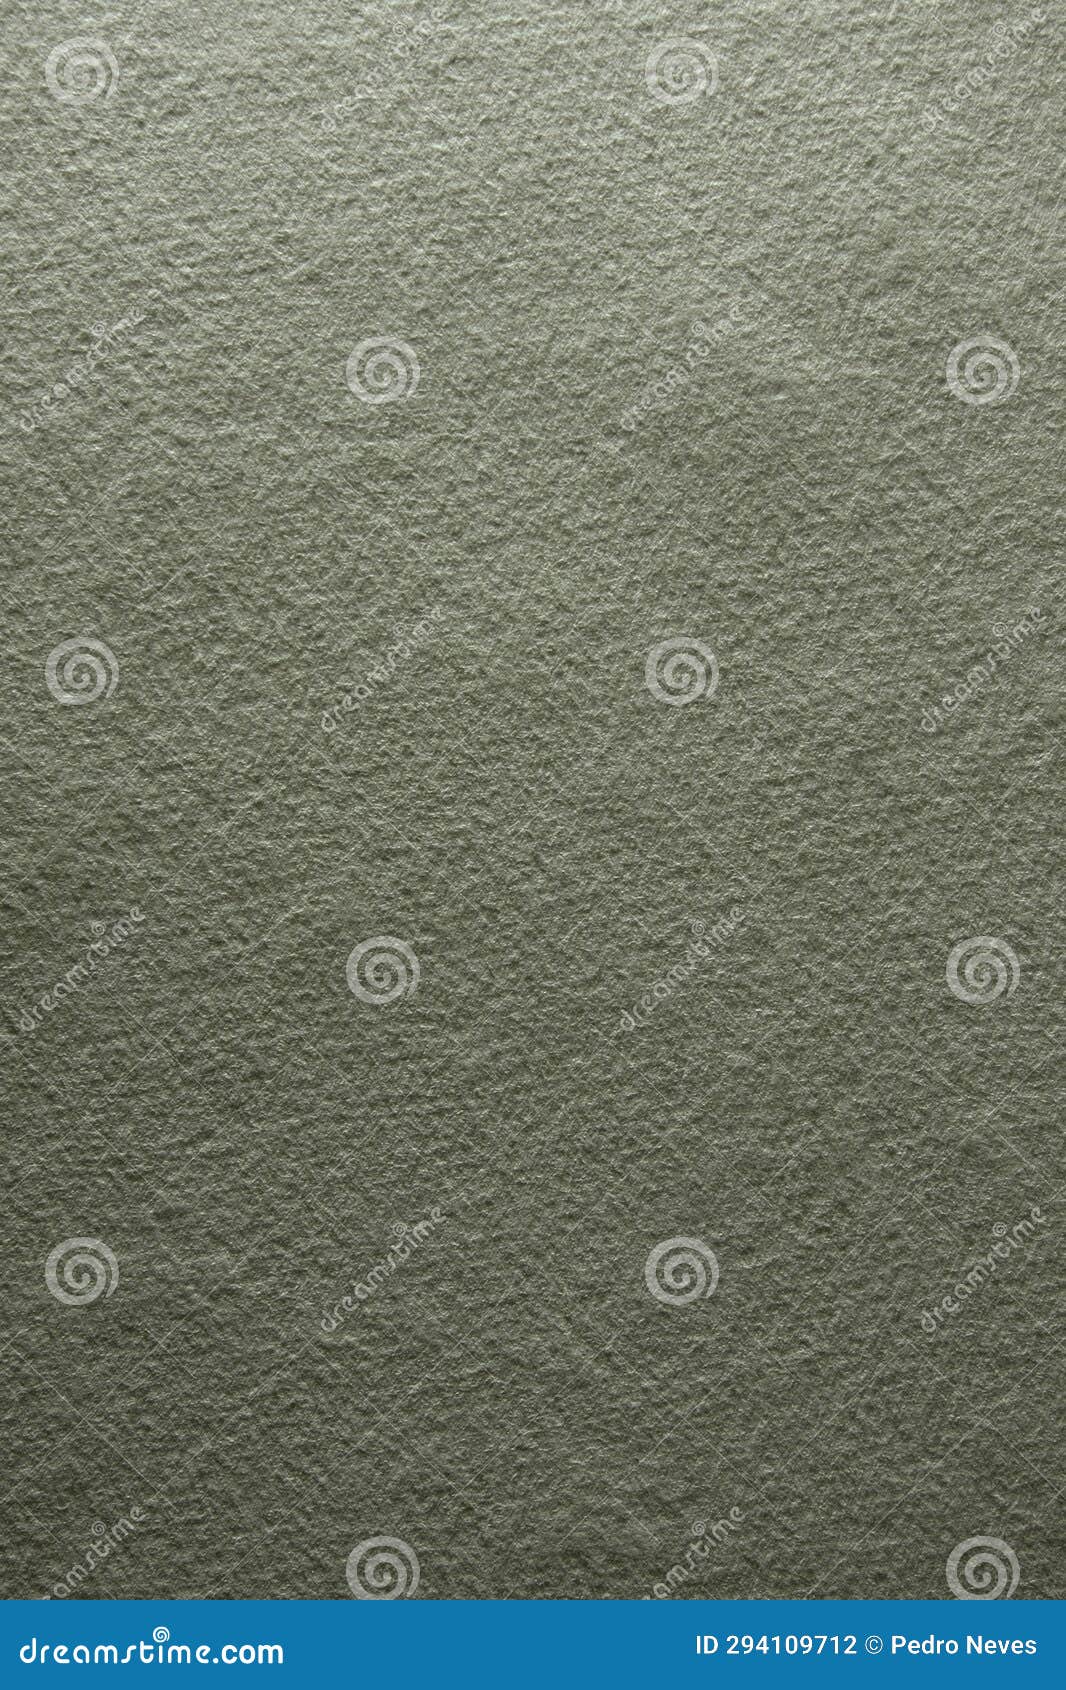 Gray Felt Texture Abstract Art Background. Colored Construction Paper  Surface. Empty Space. Stock Photo, Picture and Royalty Free Image. Image  124399938.